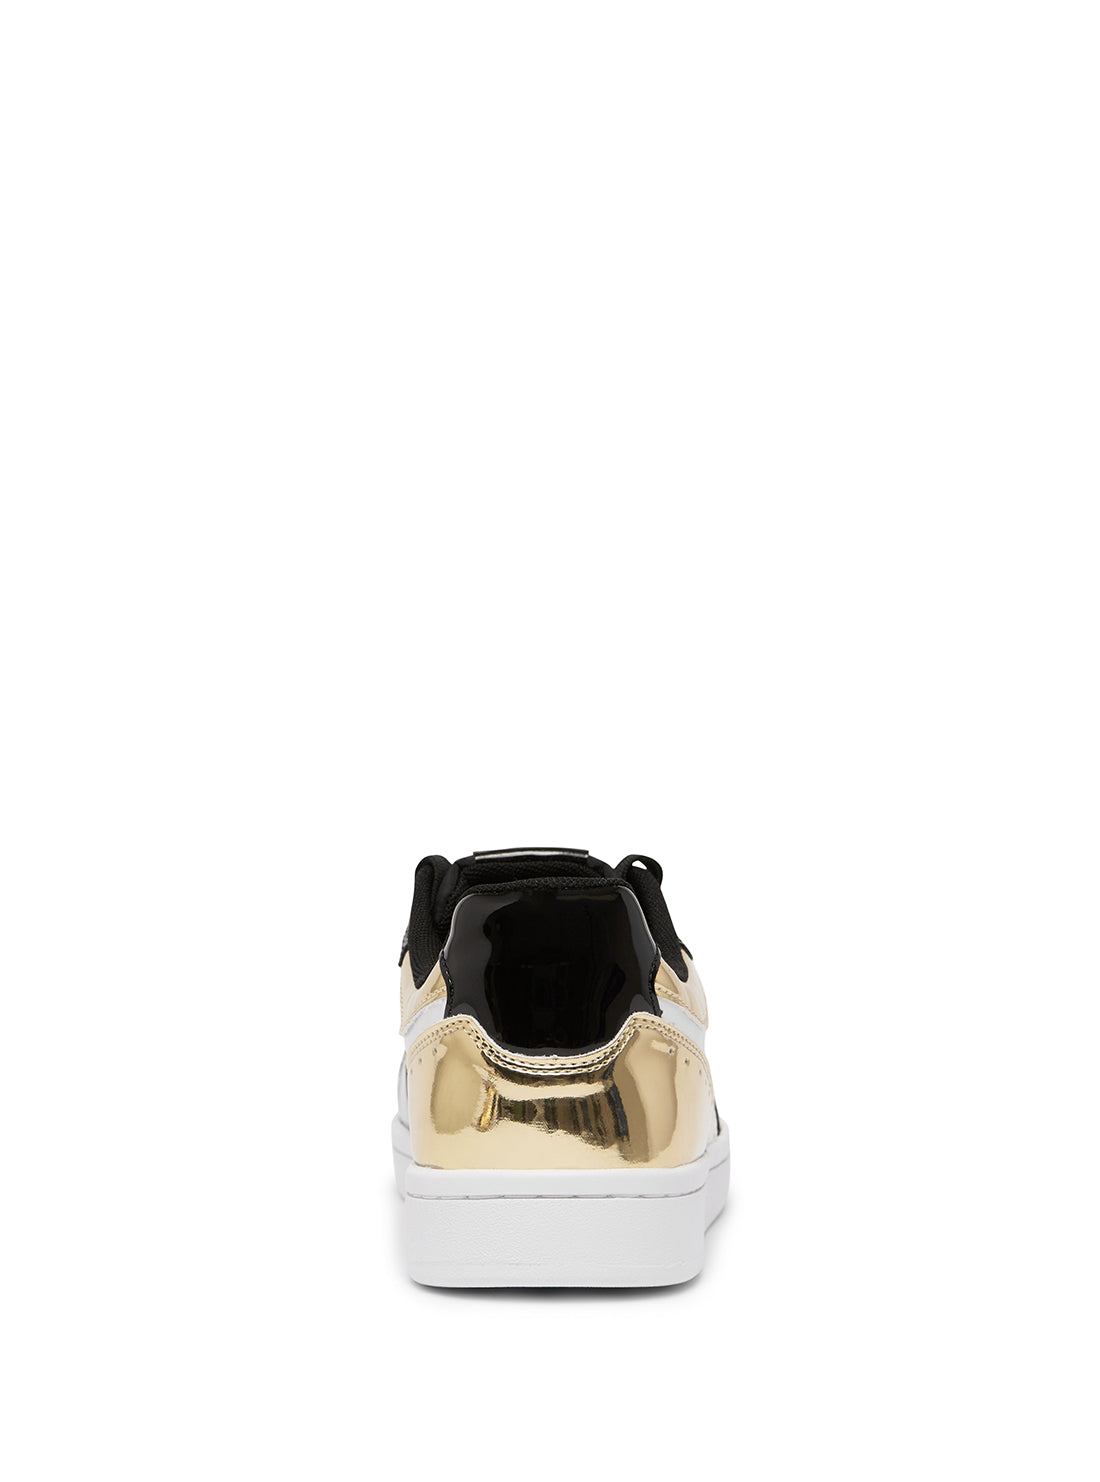 GUESS Men's Leazy Gold Low Top Sneakers LEAZY Back View